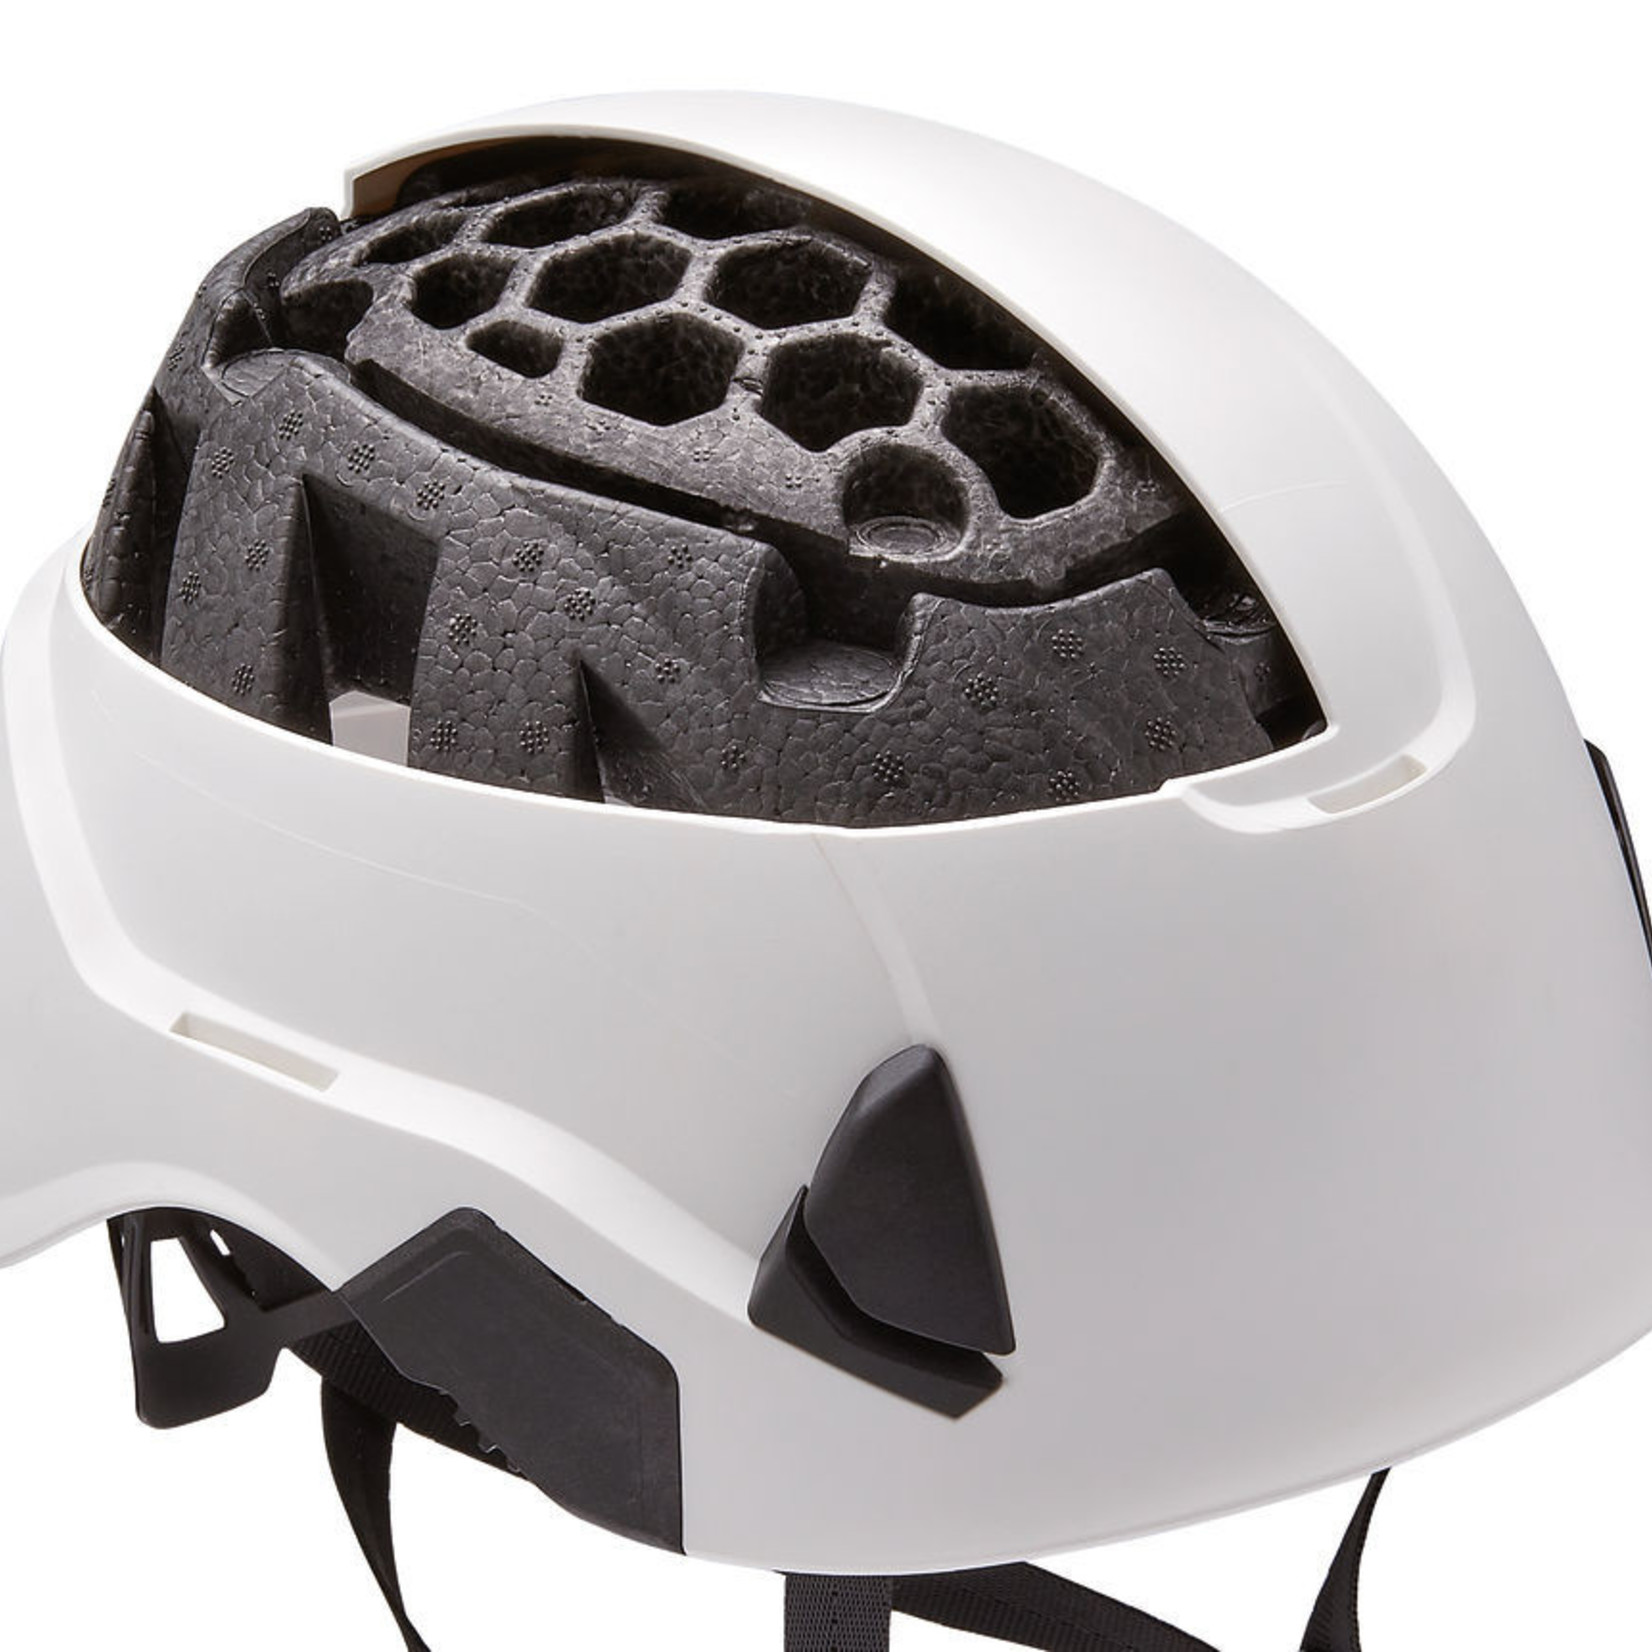 Petzl Strato Vent Helmet (Available To Order Now For 10 Day Delivery)